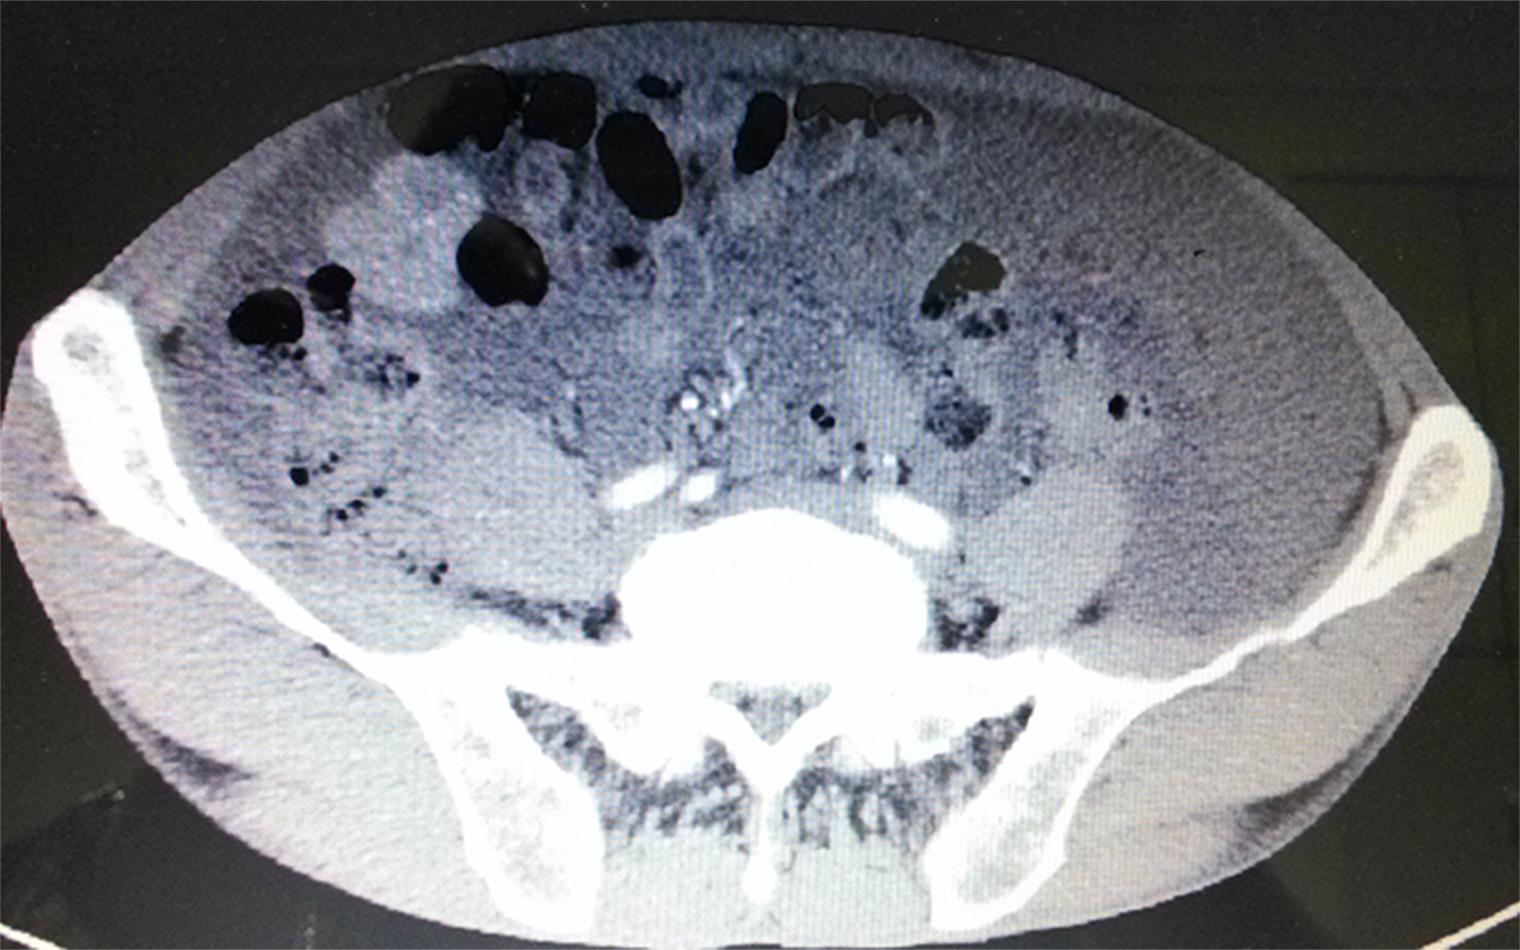 The tumor metastasized widely in the abdominal cavity.